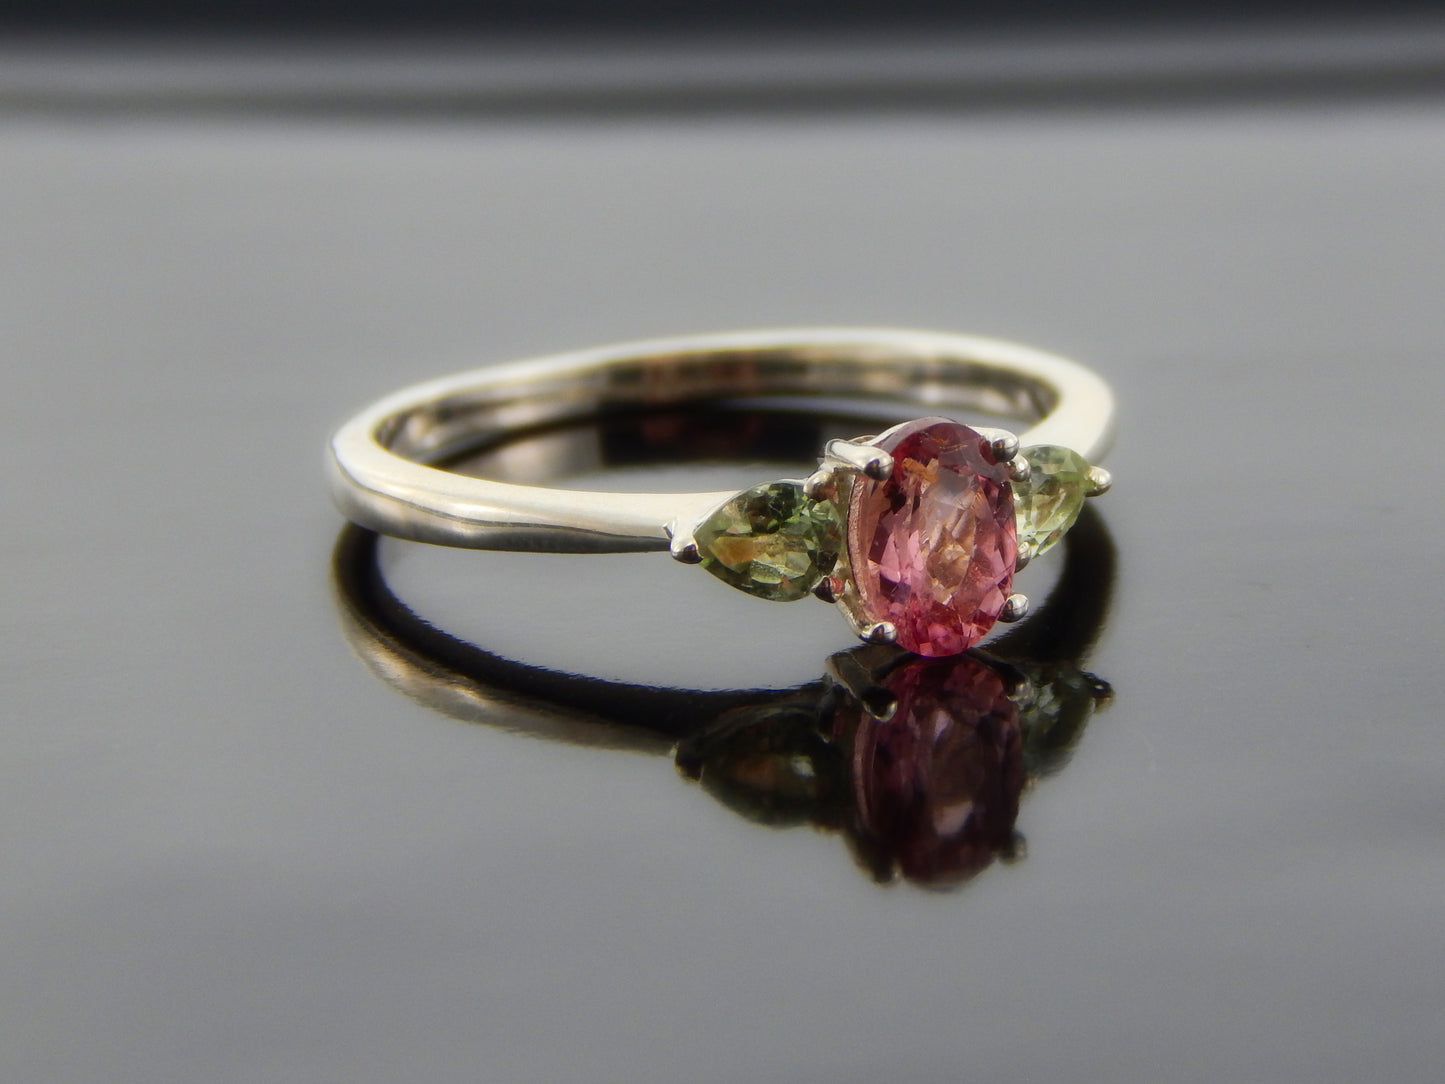 Genuine Pink and Green Tourmaline Ring in 925 Silver